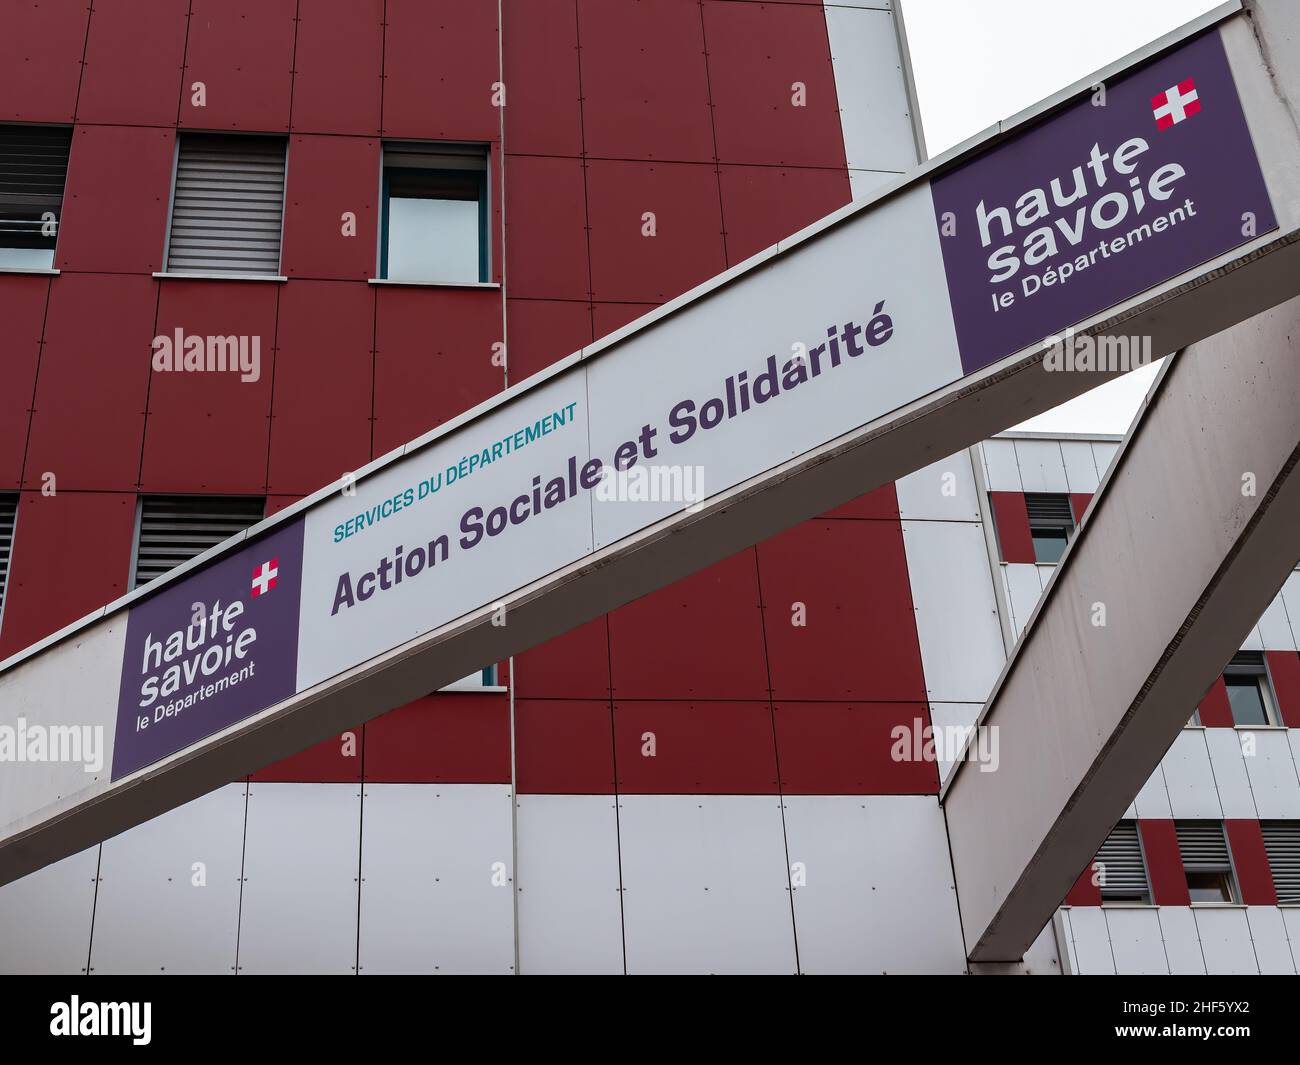 Annecy, France - January 7, 2022: Social action and Solidarity - departmental social service in Haute Savoie Stock Photo